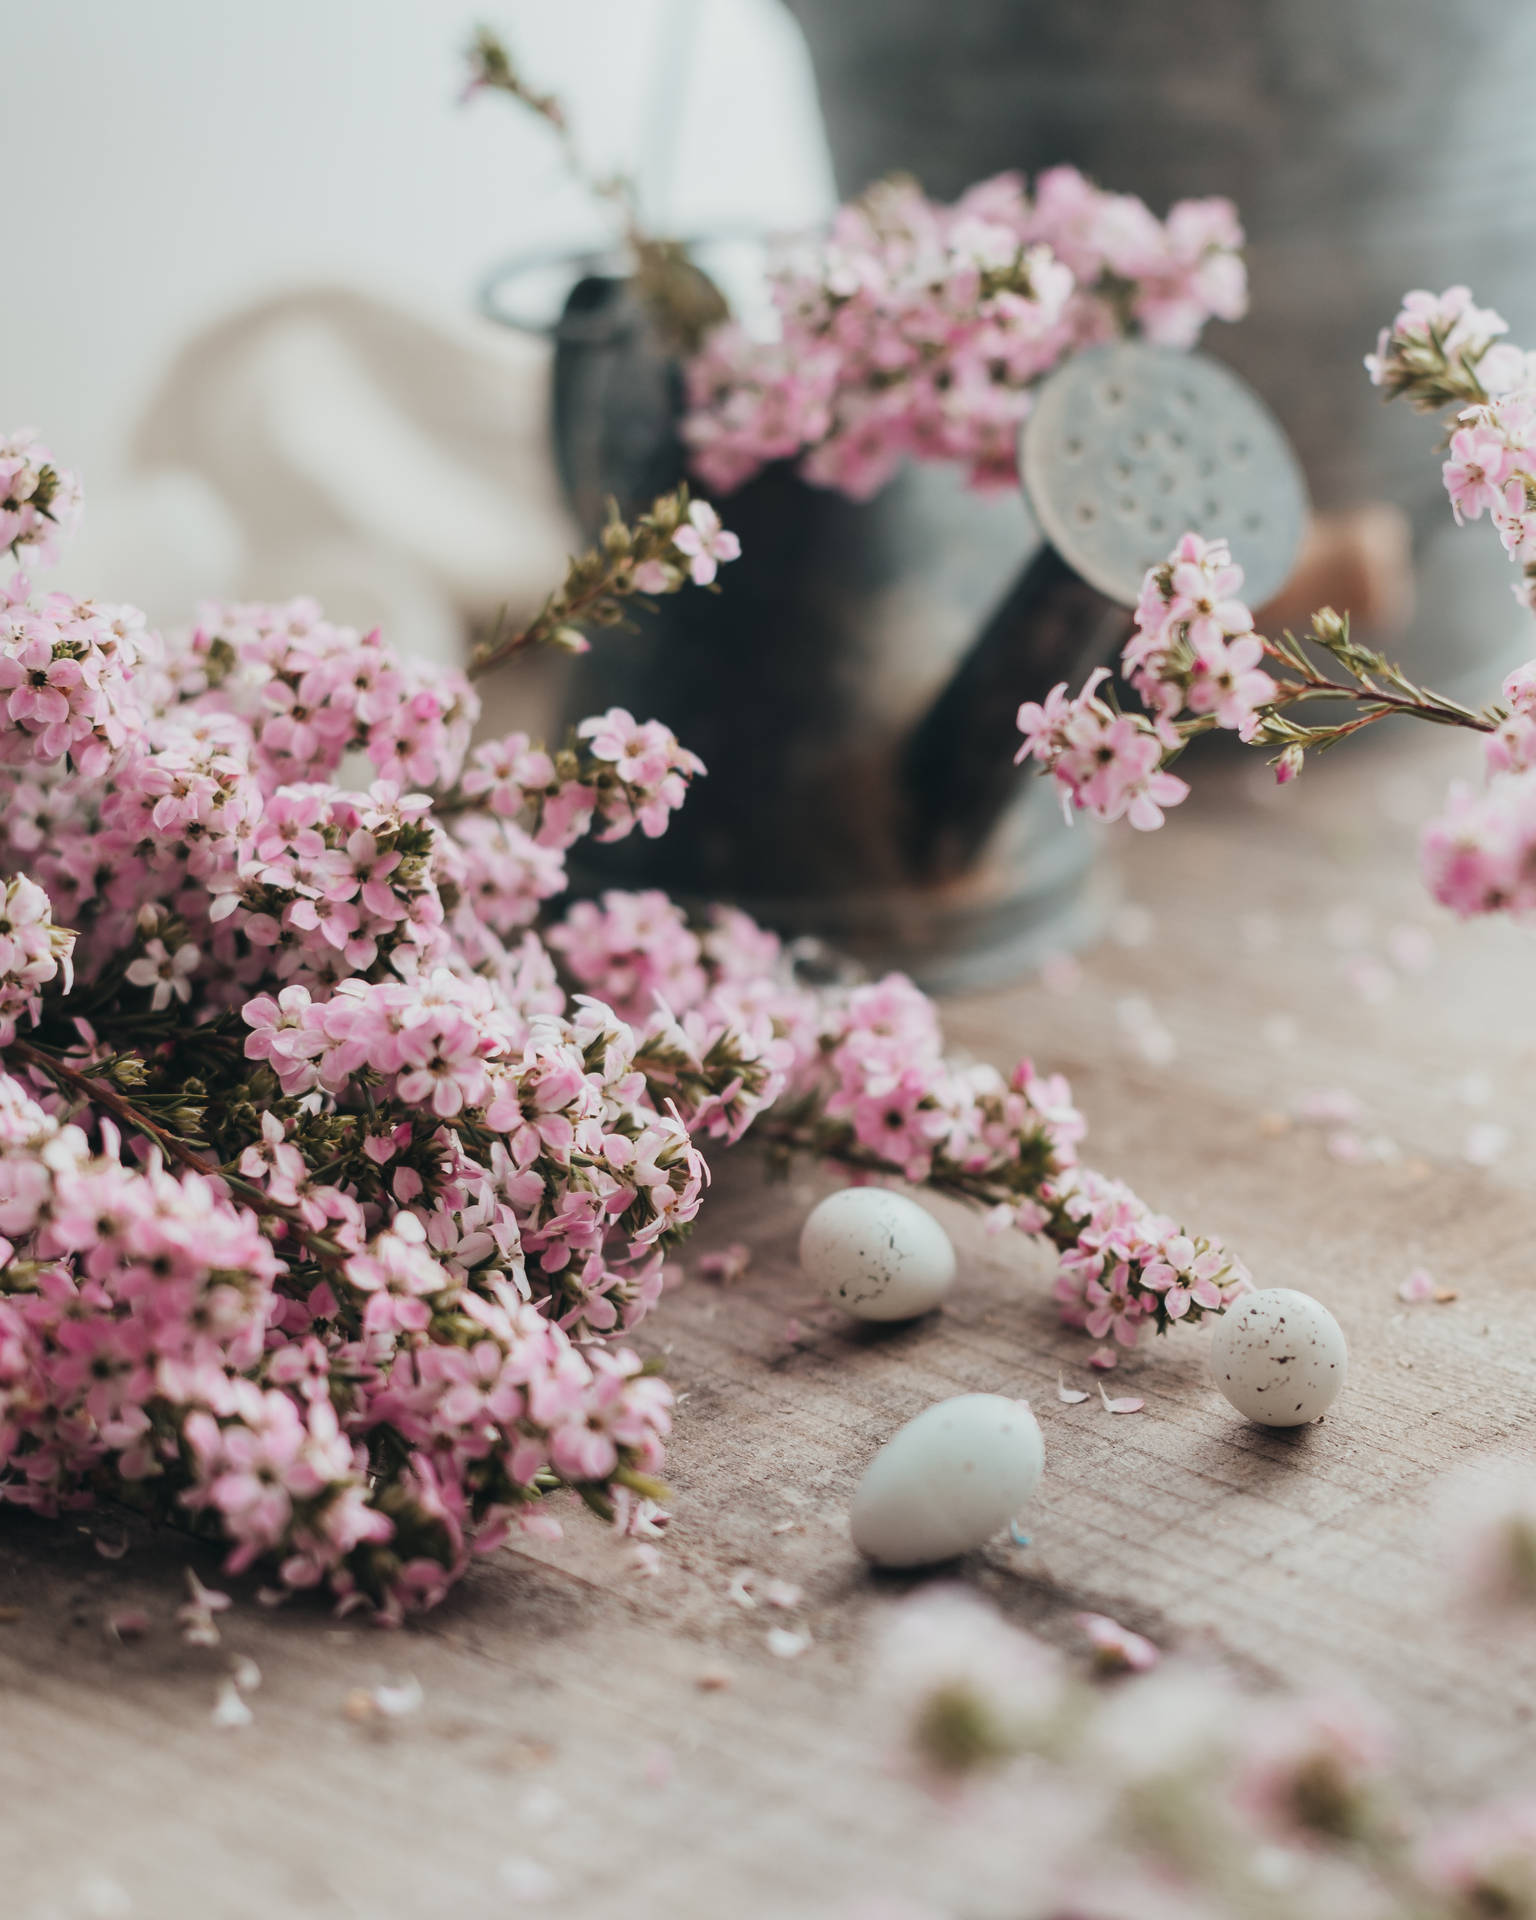 Pink Flowers And Easter Quail Eggs Background